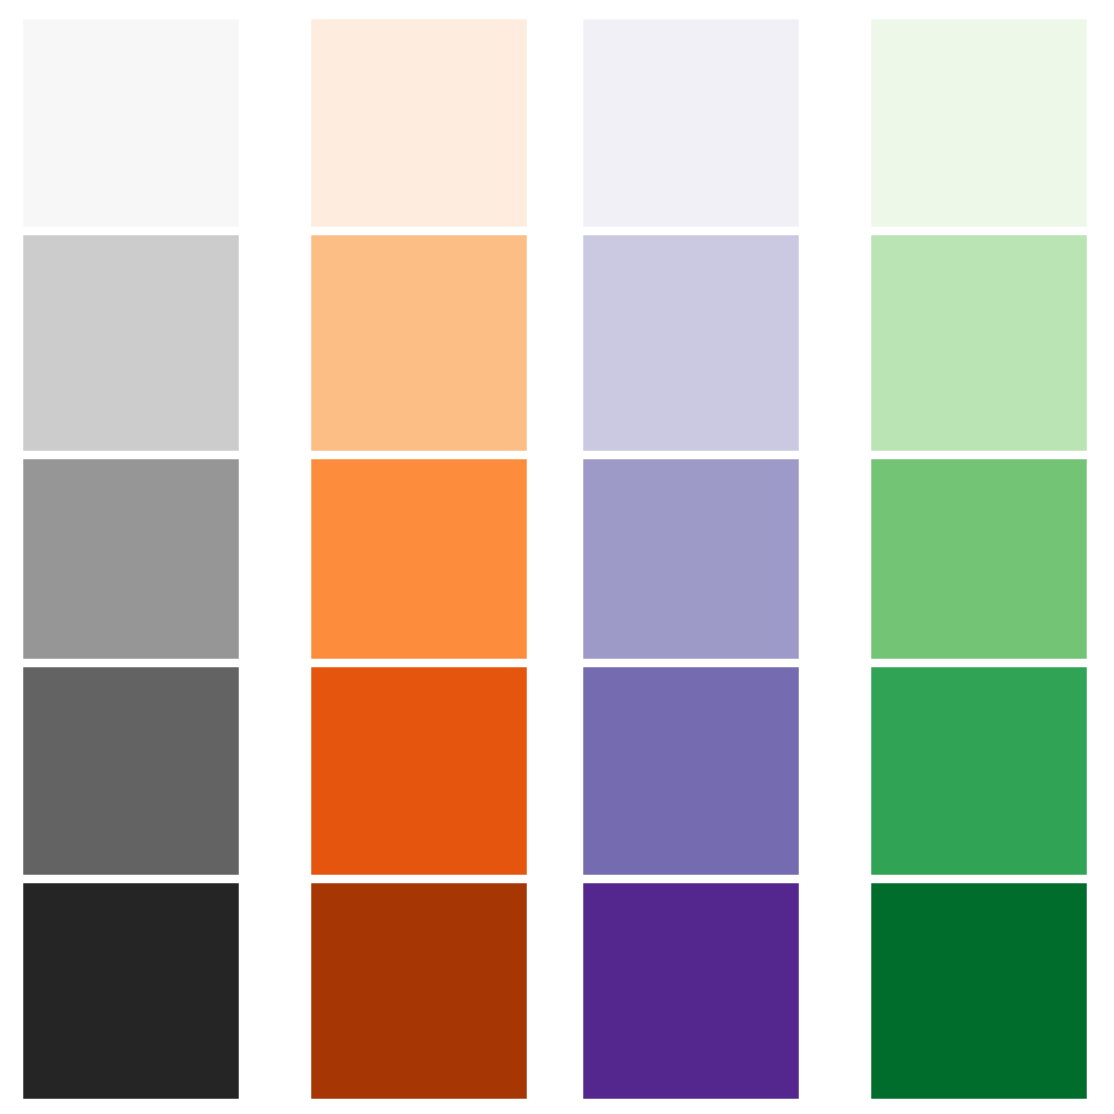 examples of sequential color schemes from ColorBrewer2.org, see text above image